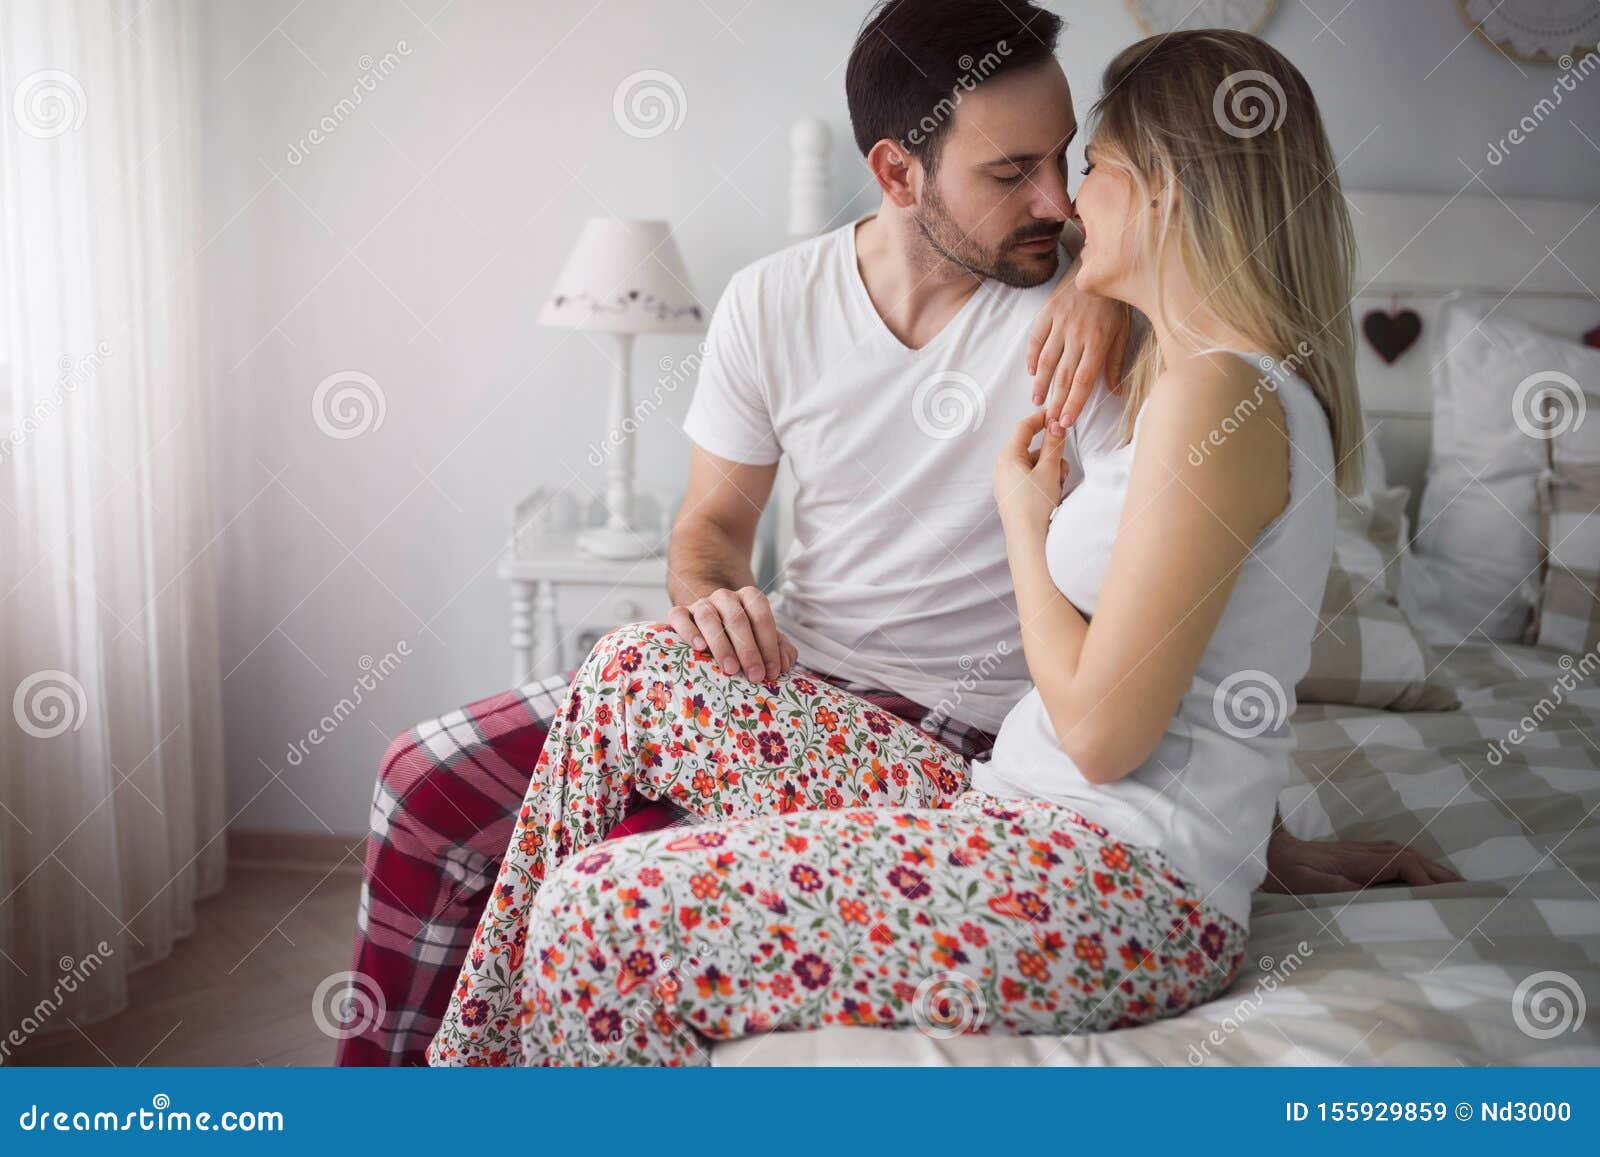 Picture Of Young Attractive Couple Kissing On Bed Stock Image Image Of Attractive Handsome